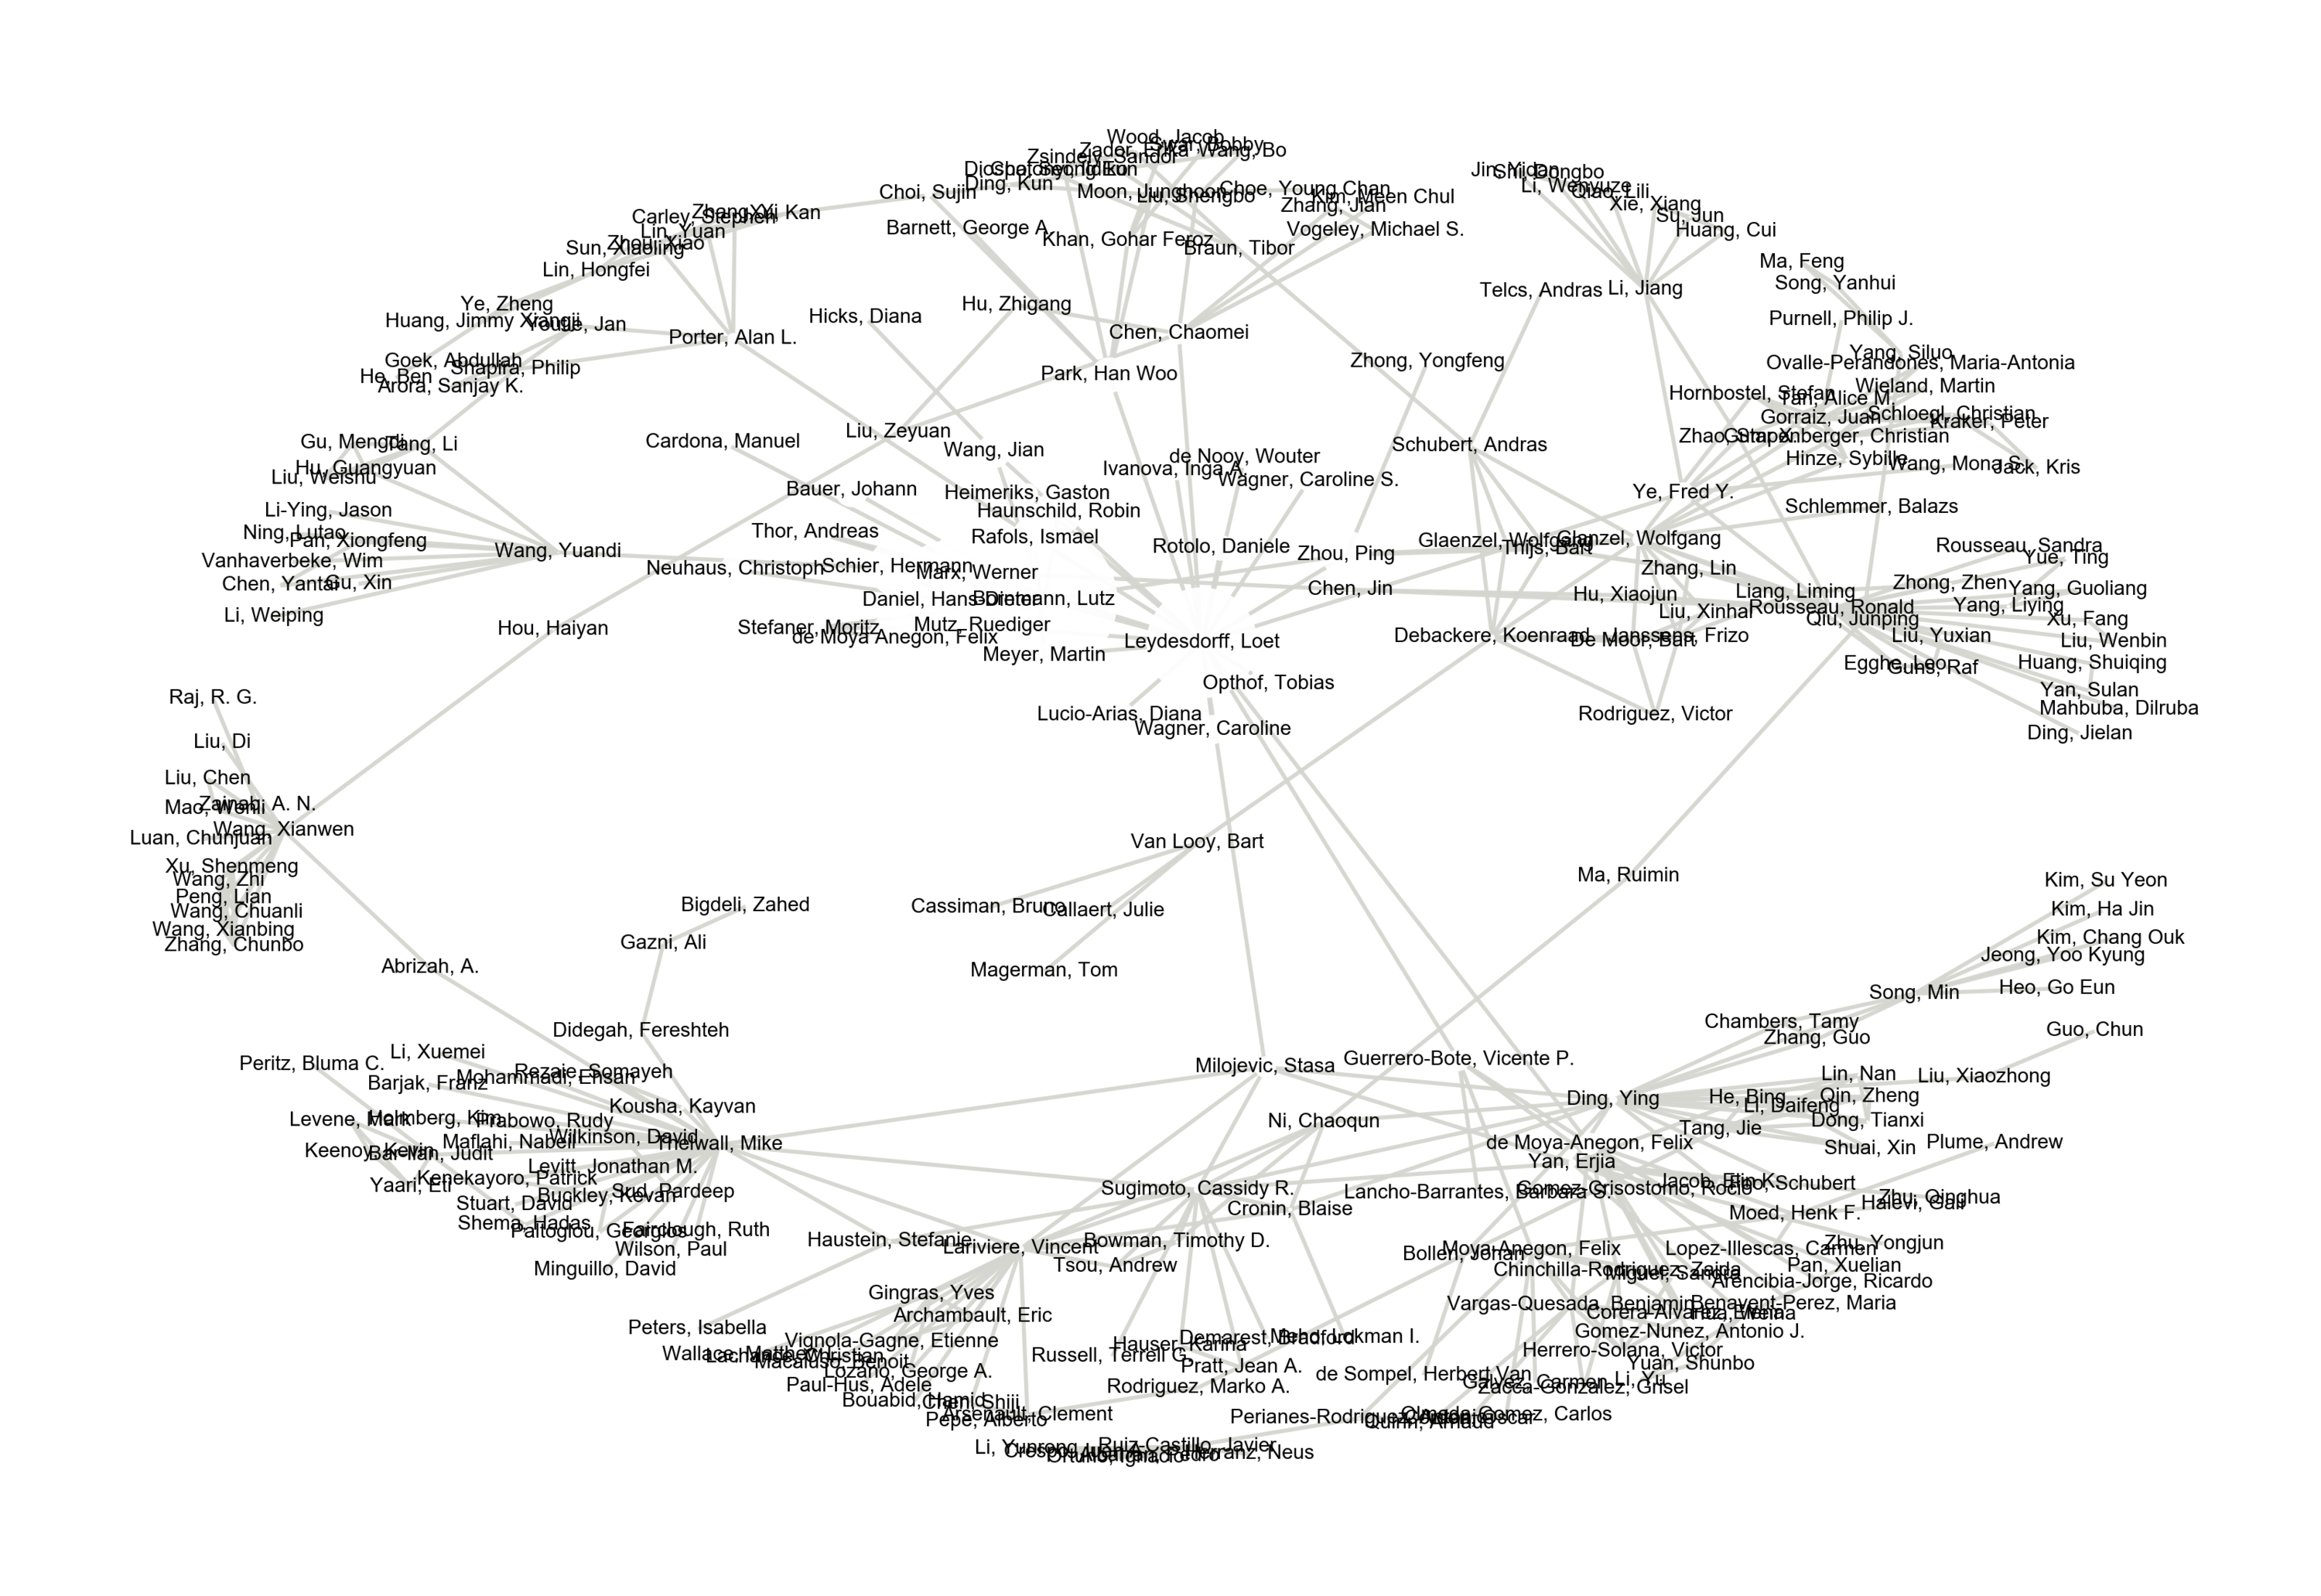 Network graph of co-authors.